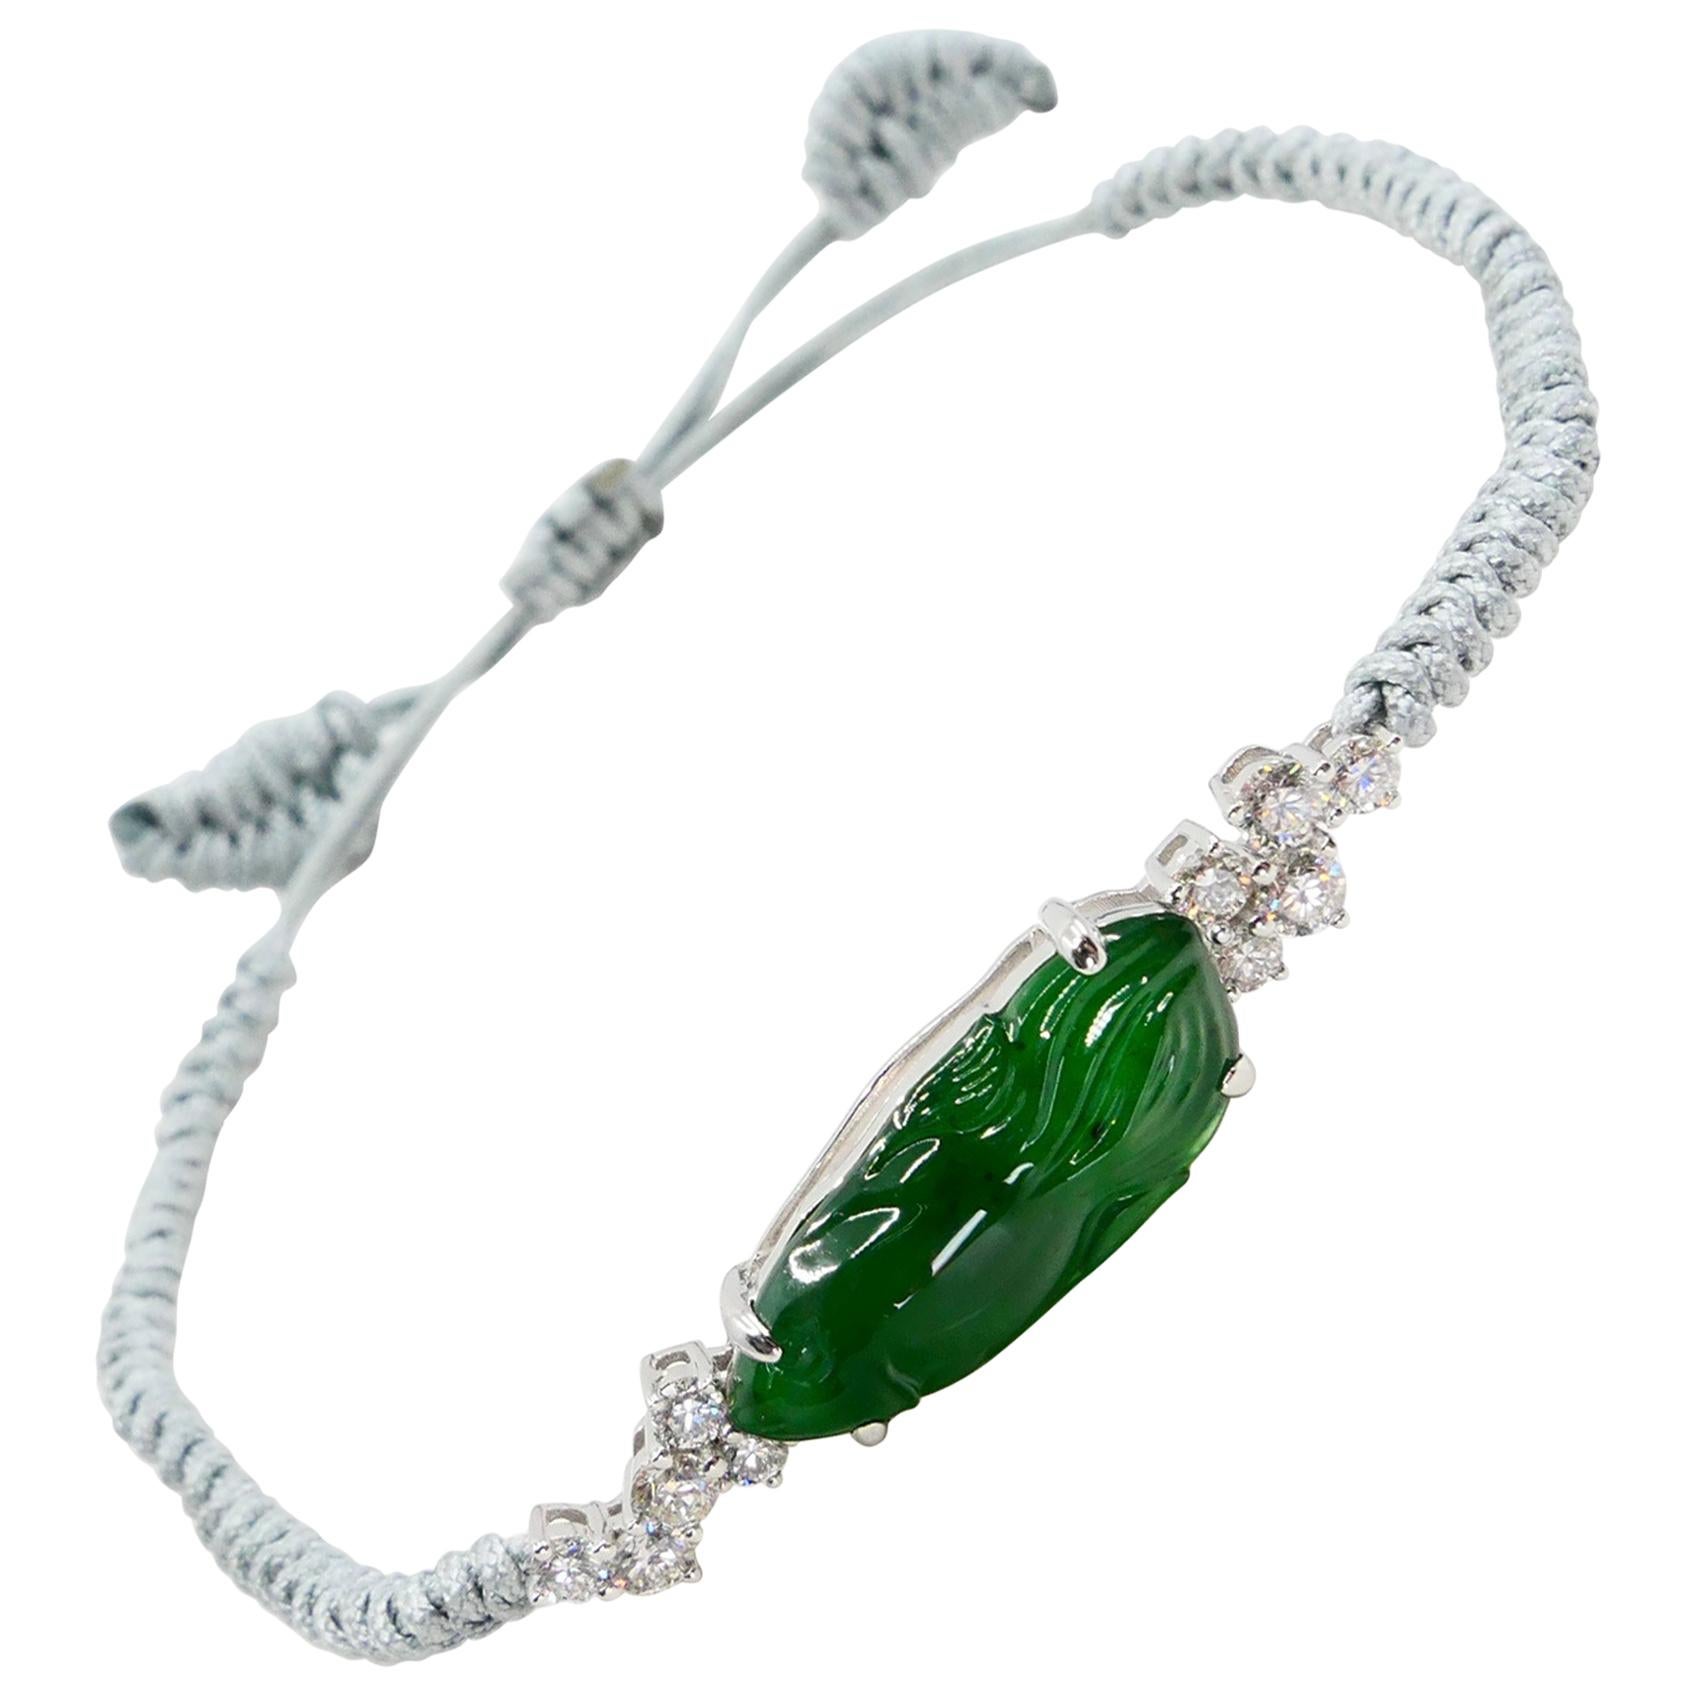 Certified Natural Jade and Diamond Bracelet, Imperial Green, Prosperity Fish